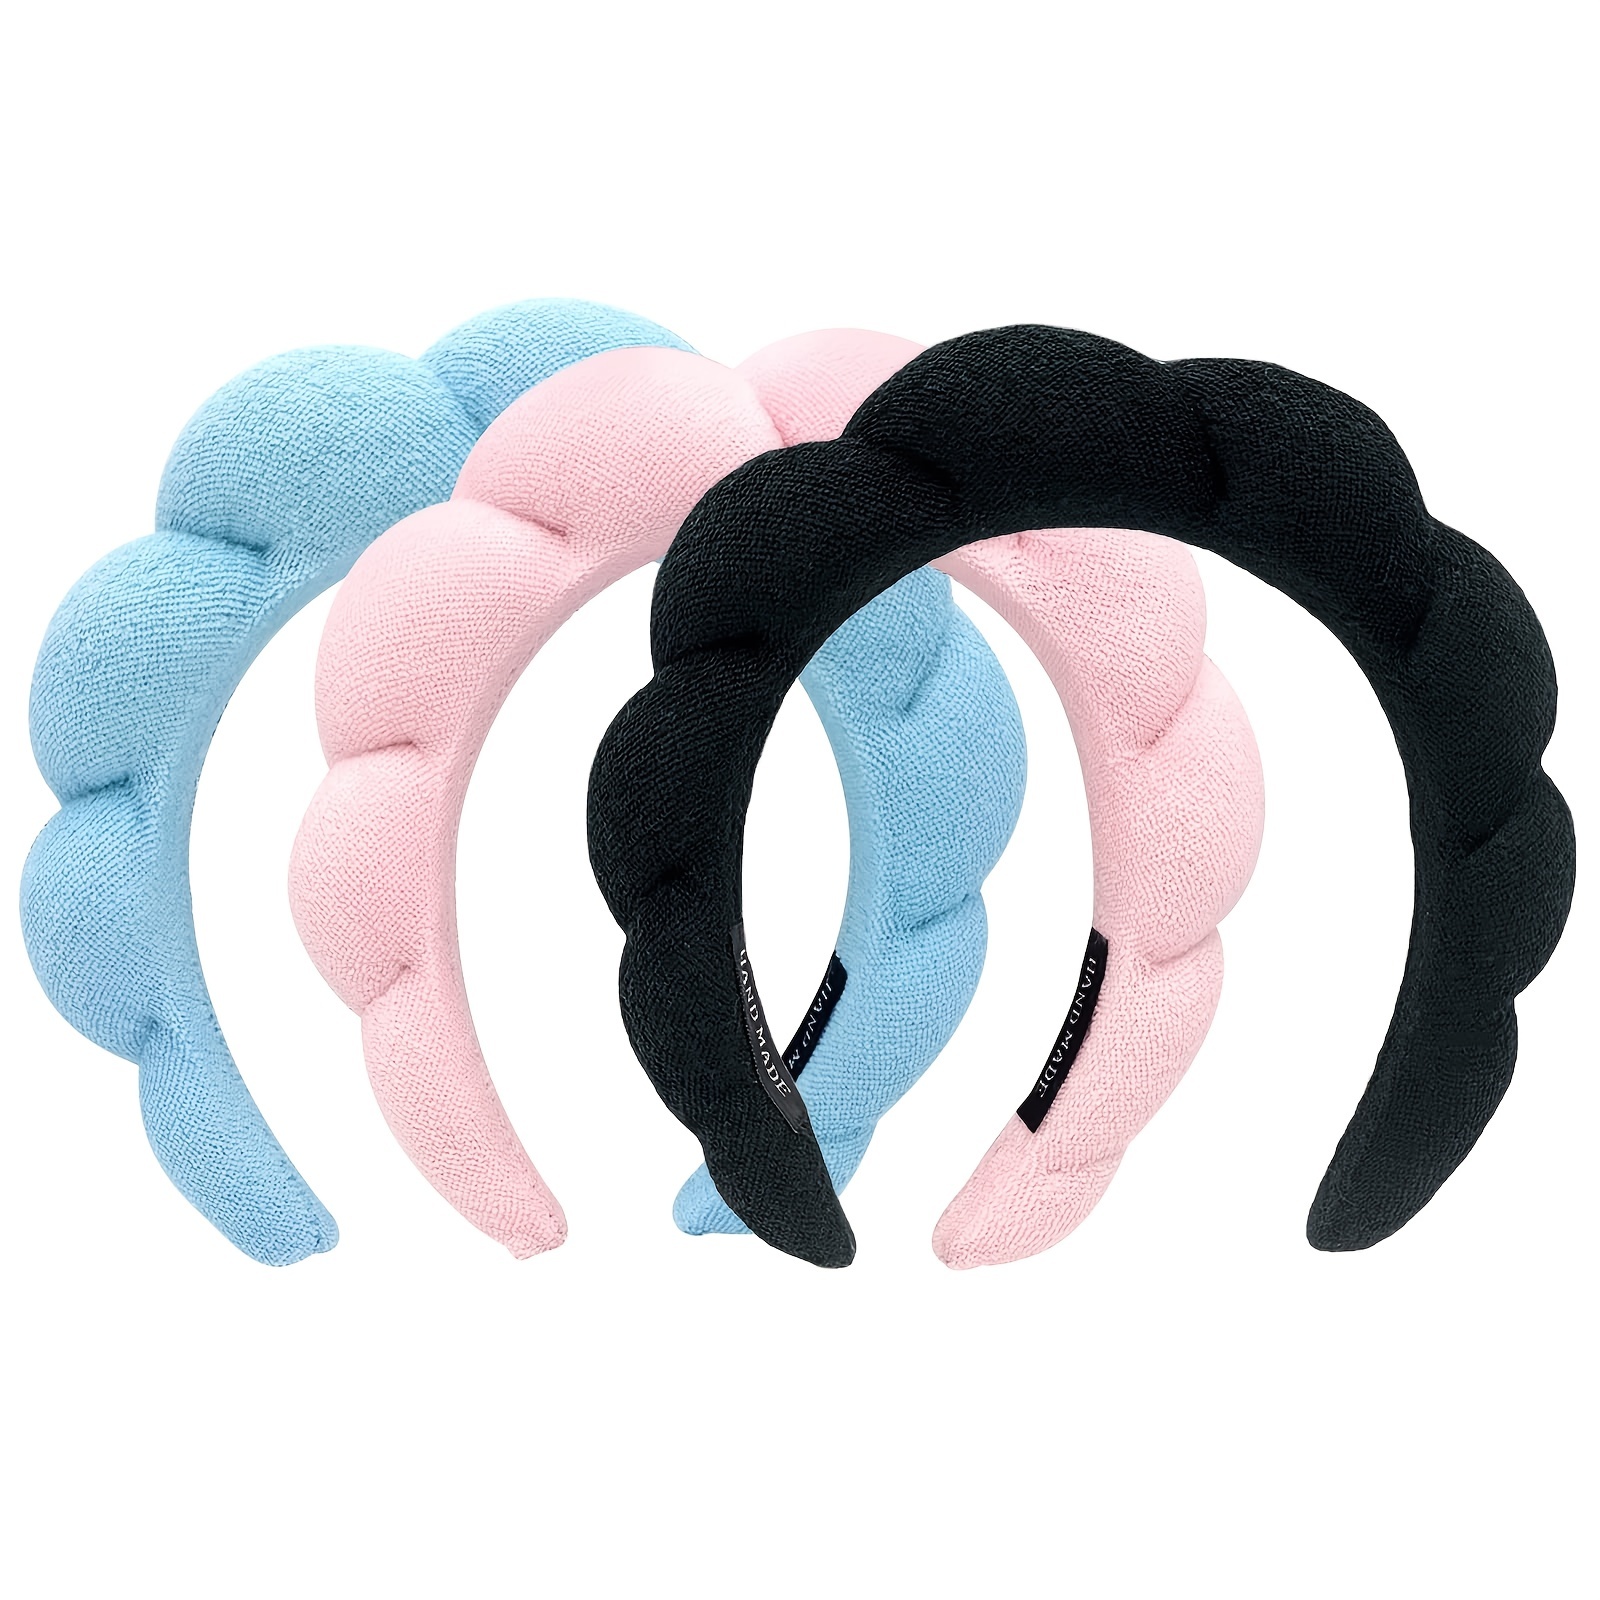 New Heatless Curl Stick With Cloth Cover Cute Ball Head Hair Curler Headband  Hair Rollers Wave Form Curling Rod Hair Style Tools Gadgets - CJdropshipping